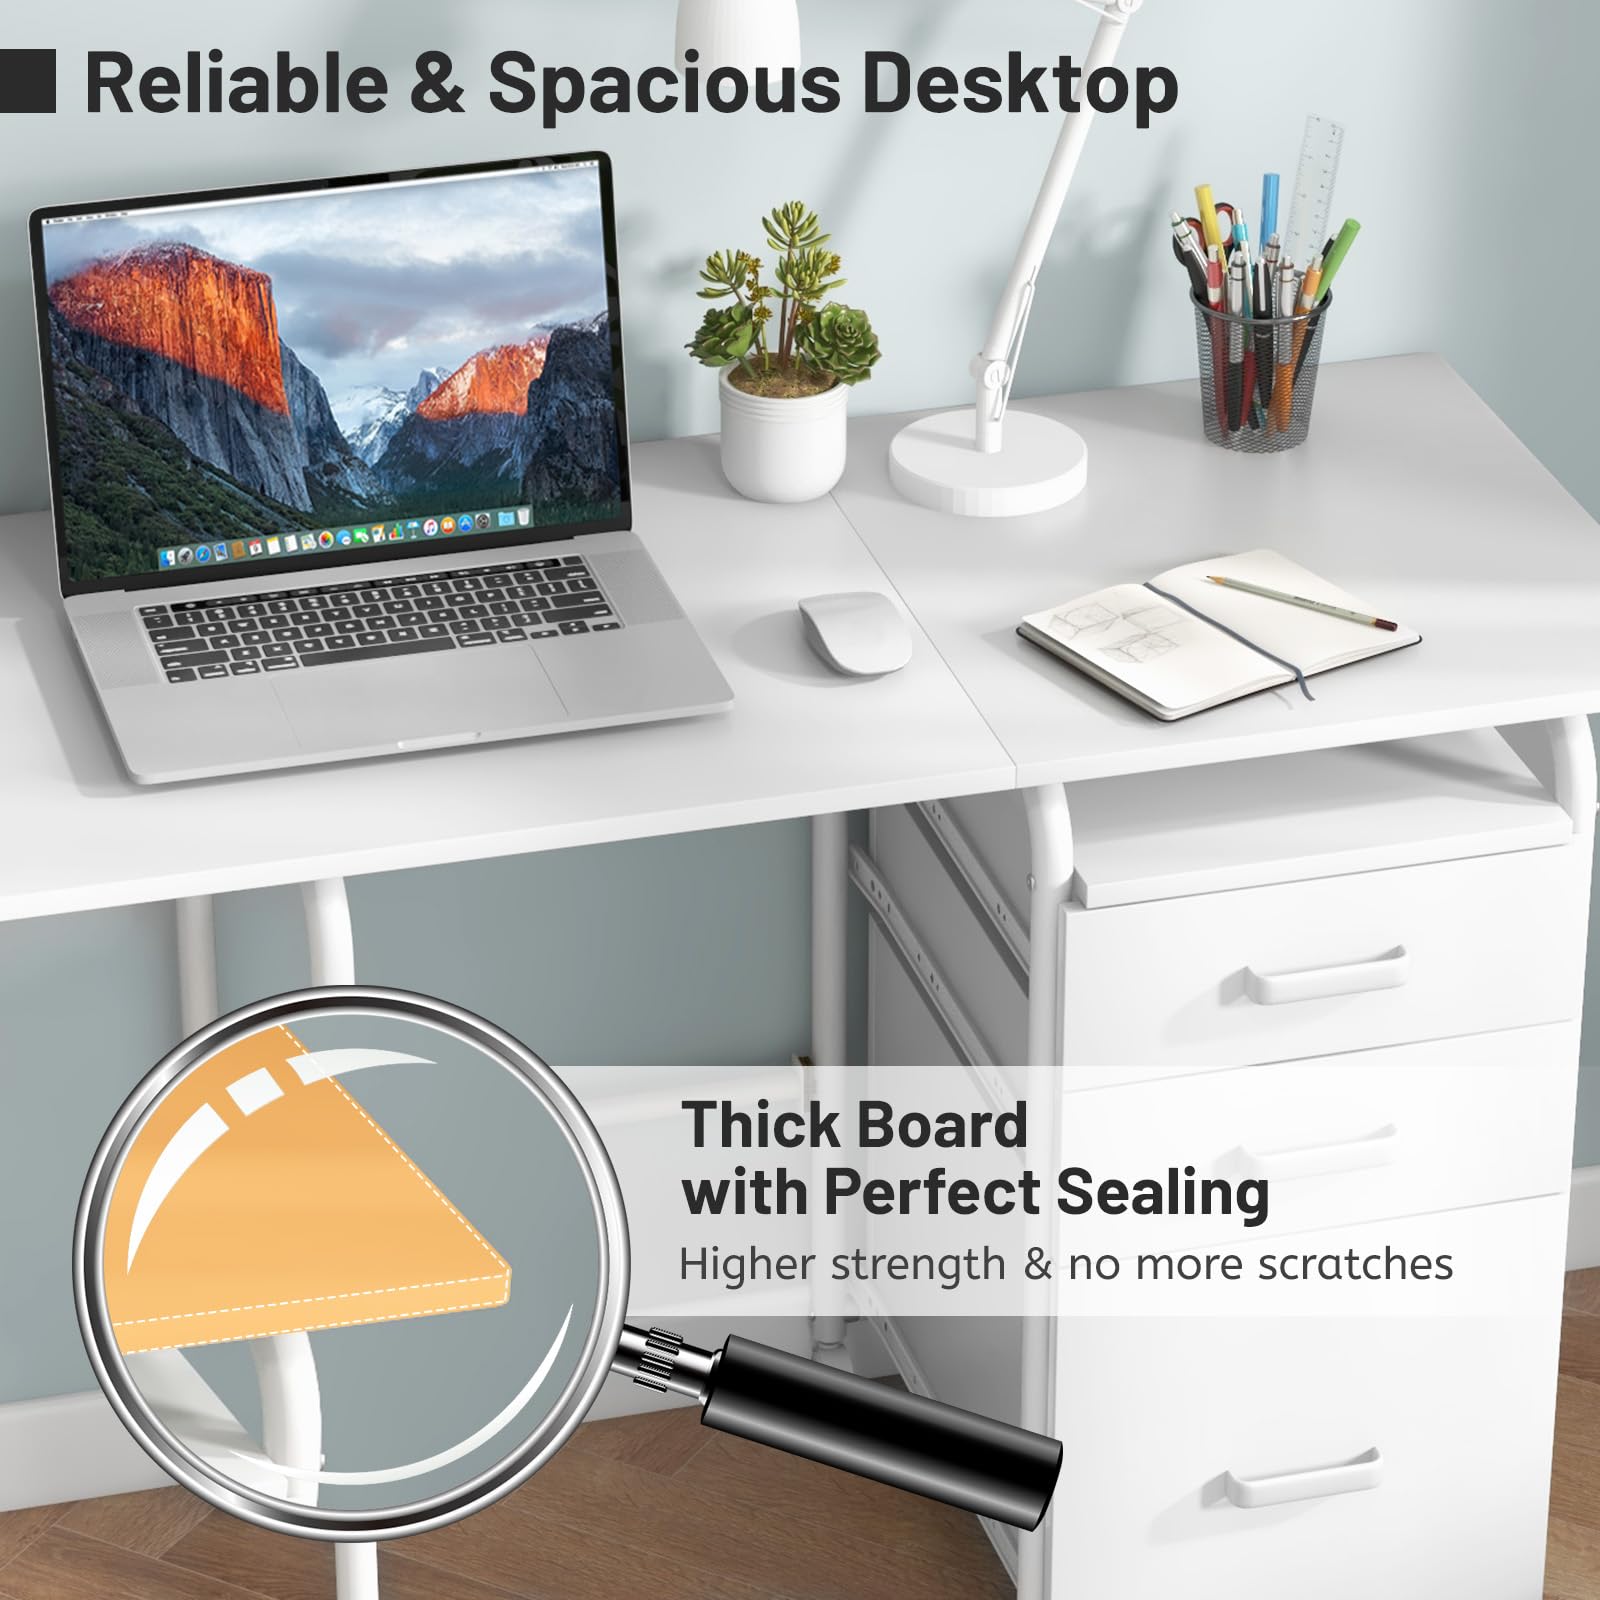 Giantex Folding Desk for Small Space, Rolling Home Office Desk with 3 Drawers & Lockable Universal Wheels